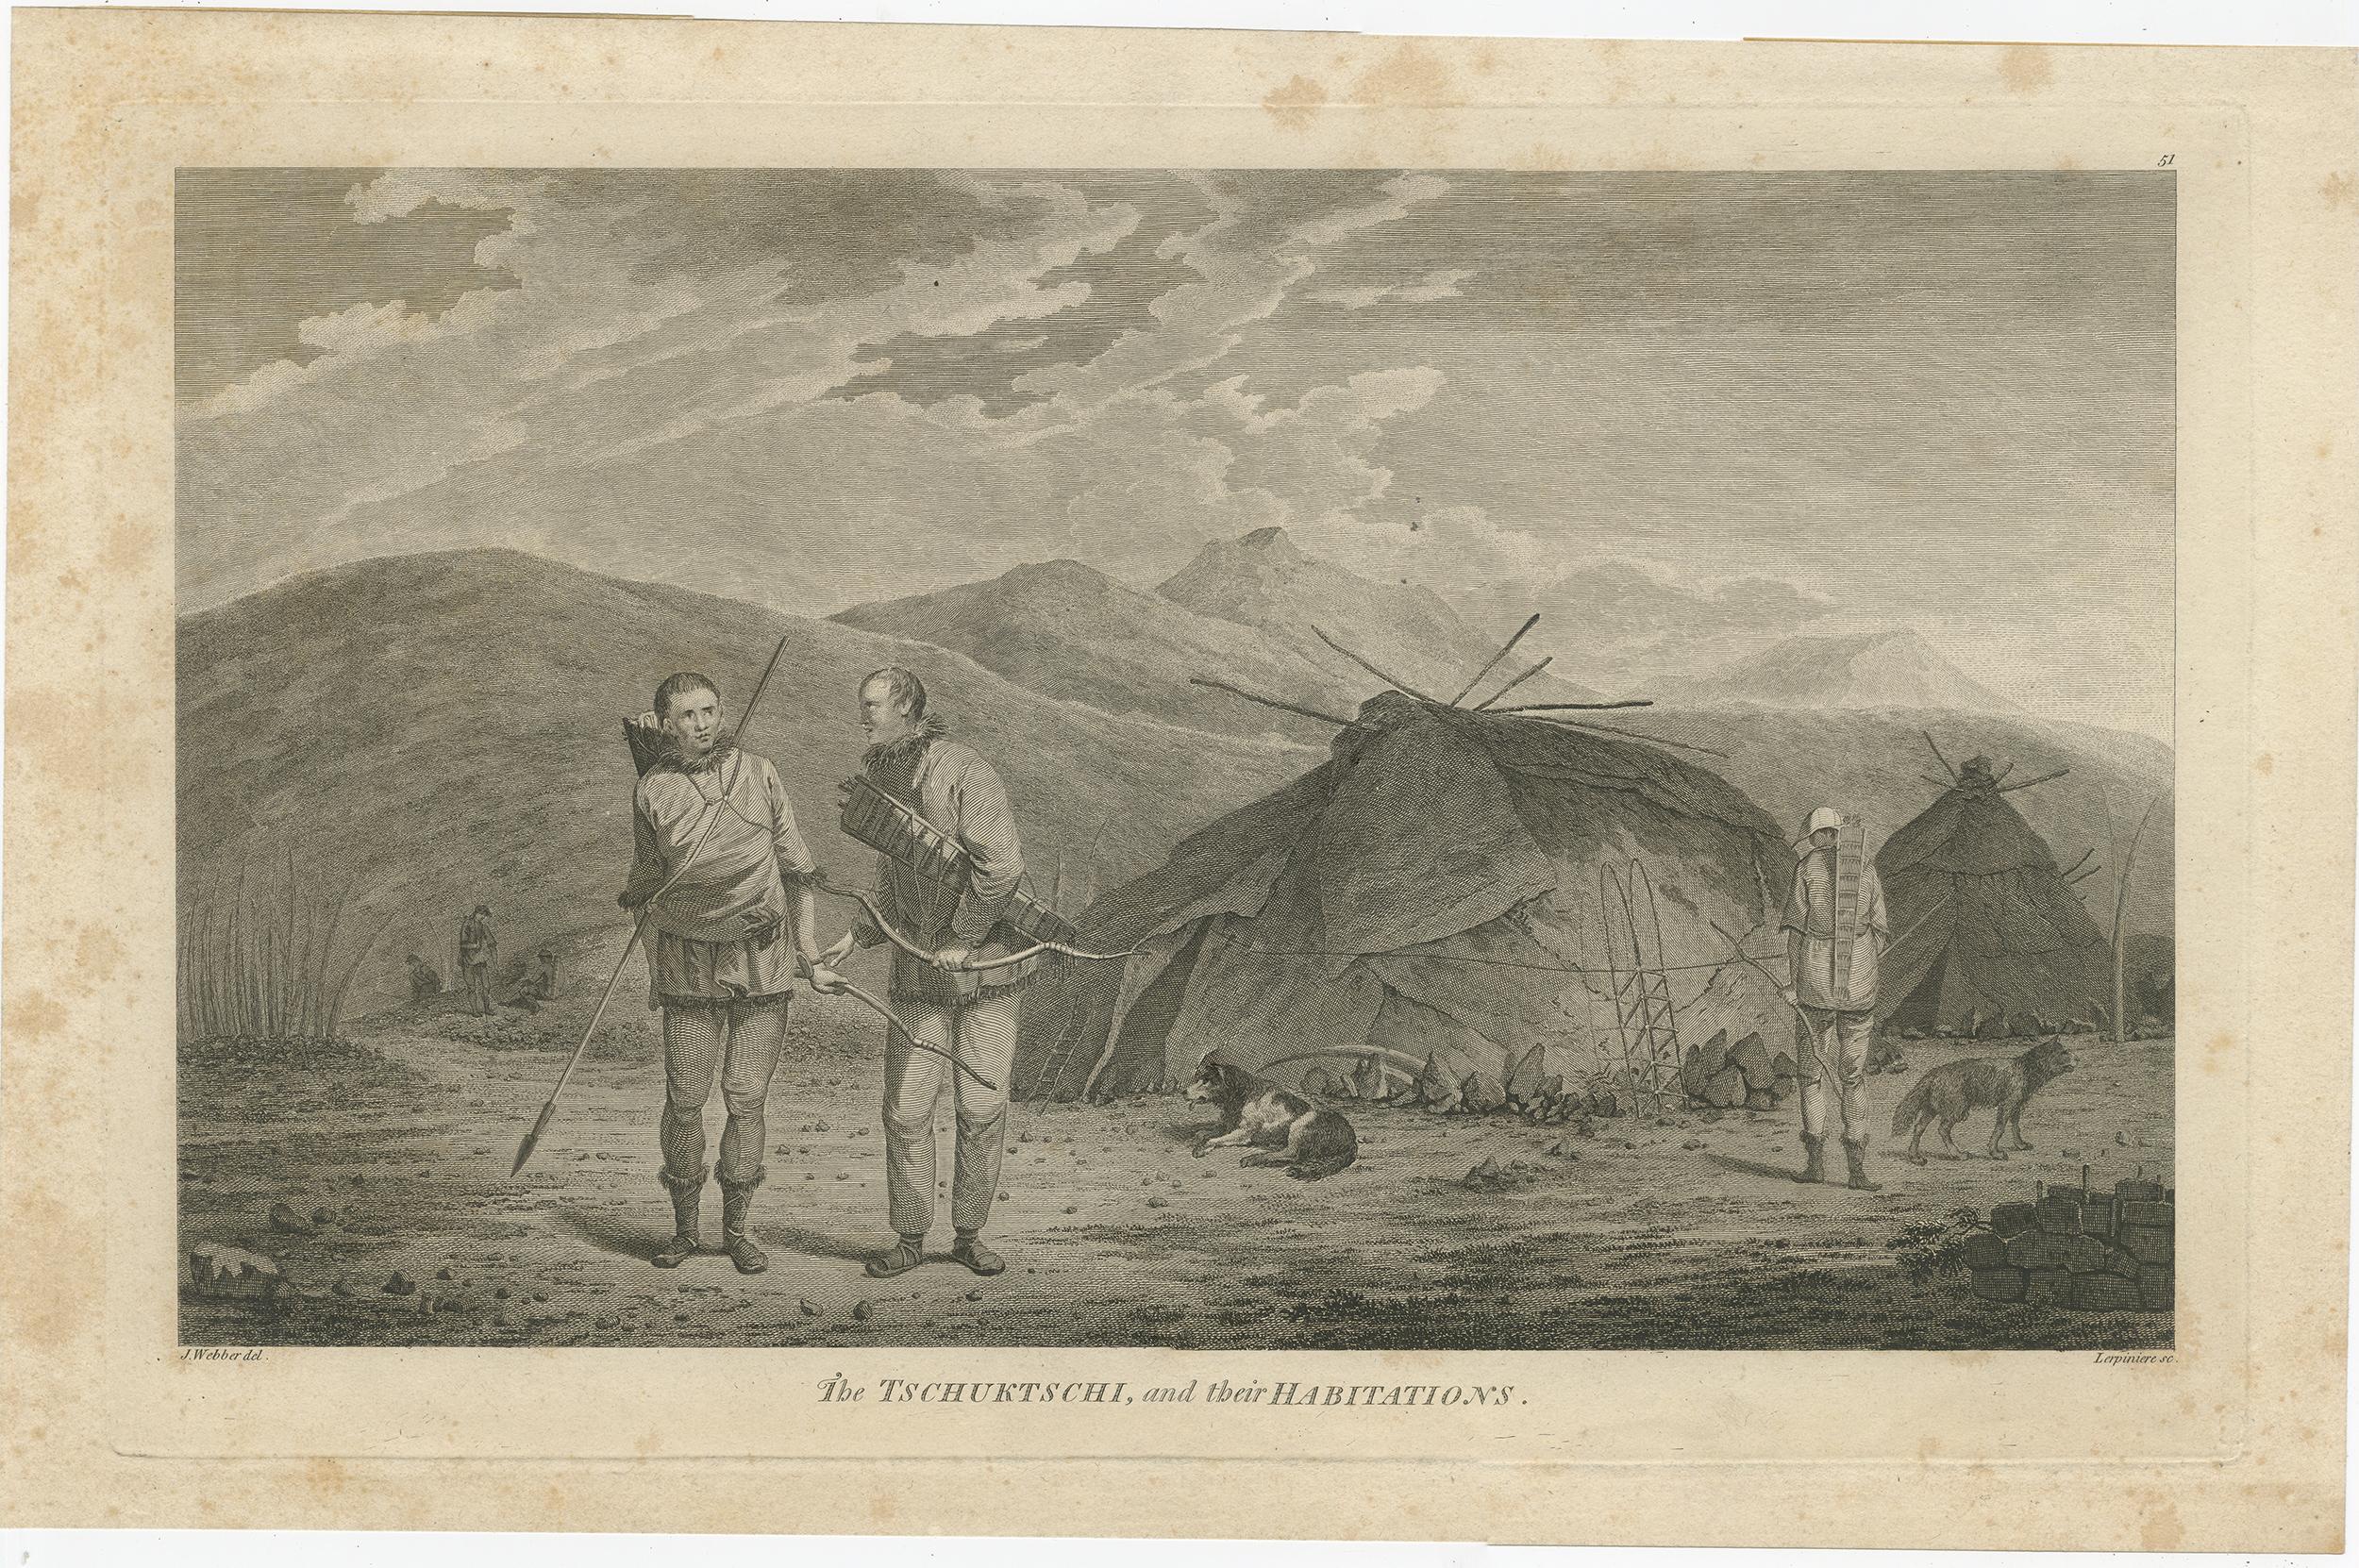 Antique print titled 'The Tschuktschi and their Habitations'. This engraving shows two Tschuktschi (Chukchi) men from the Chukotski Peninsula in Siberia. Webber drew the original image in August 1778 on James Cook's third Pacific Voyage. Cook